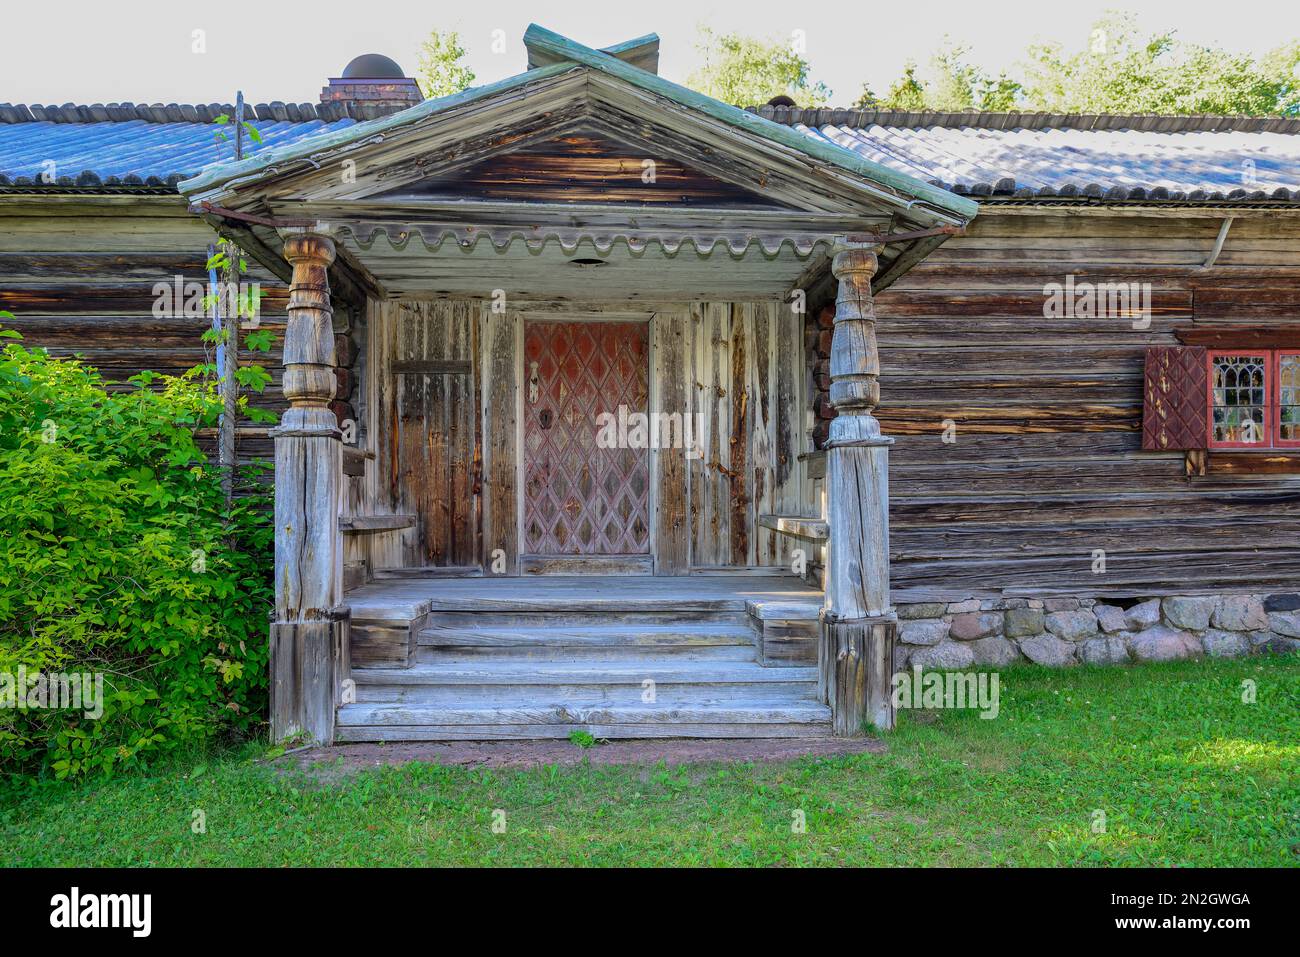 Porch of an old log-house, Dalarna, Sweden Stock Photo